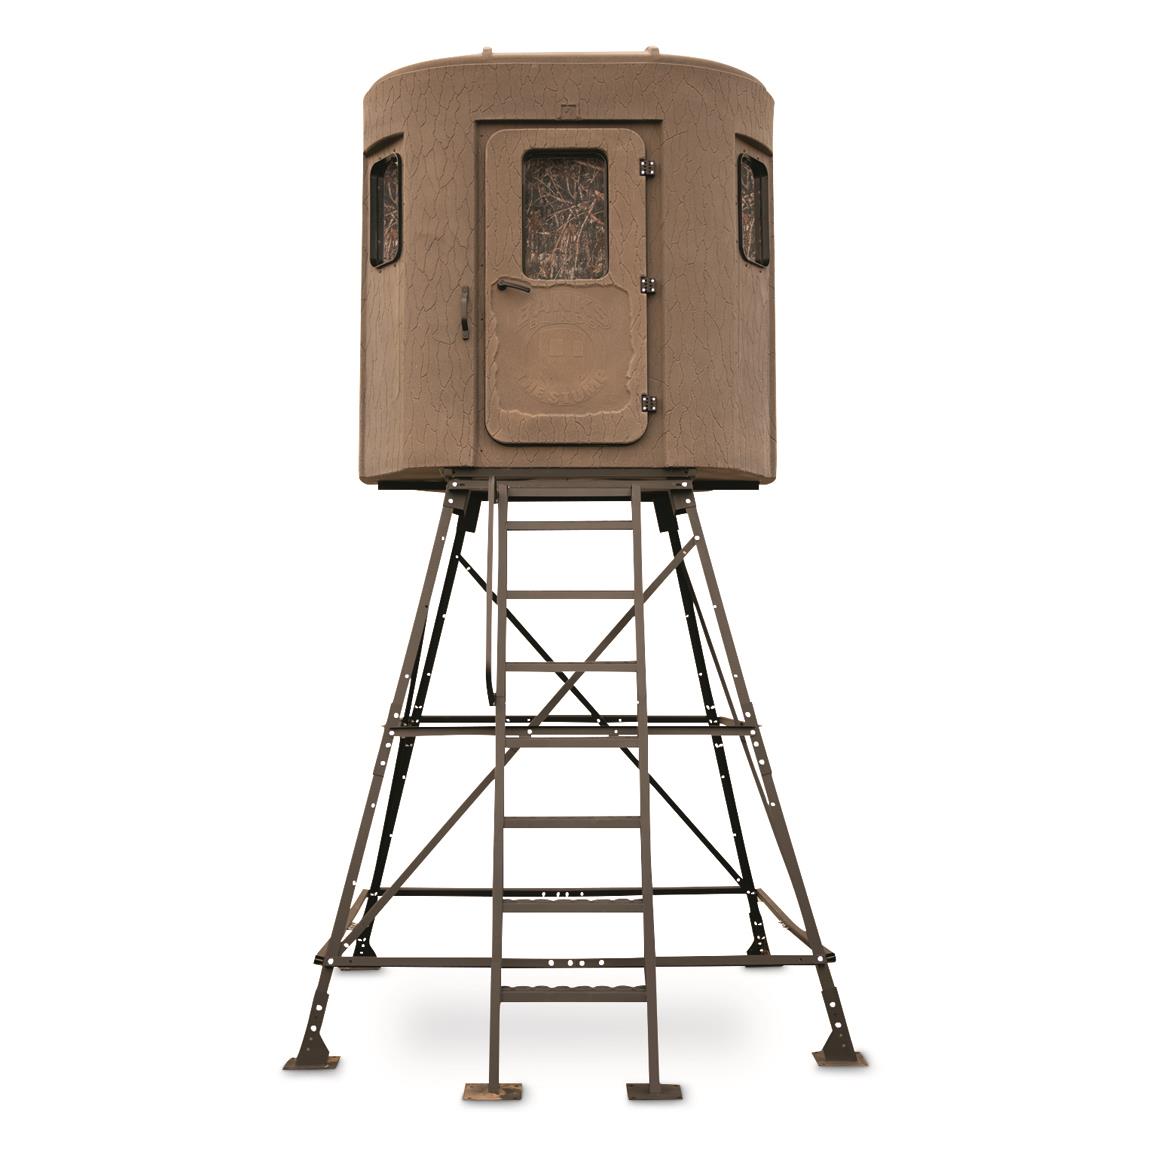 Tripod Deer Stand Blind Hunting Universal Round Camo Concealment Protected S 